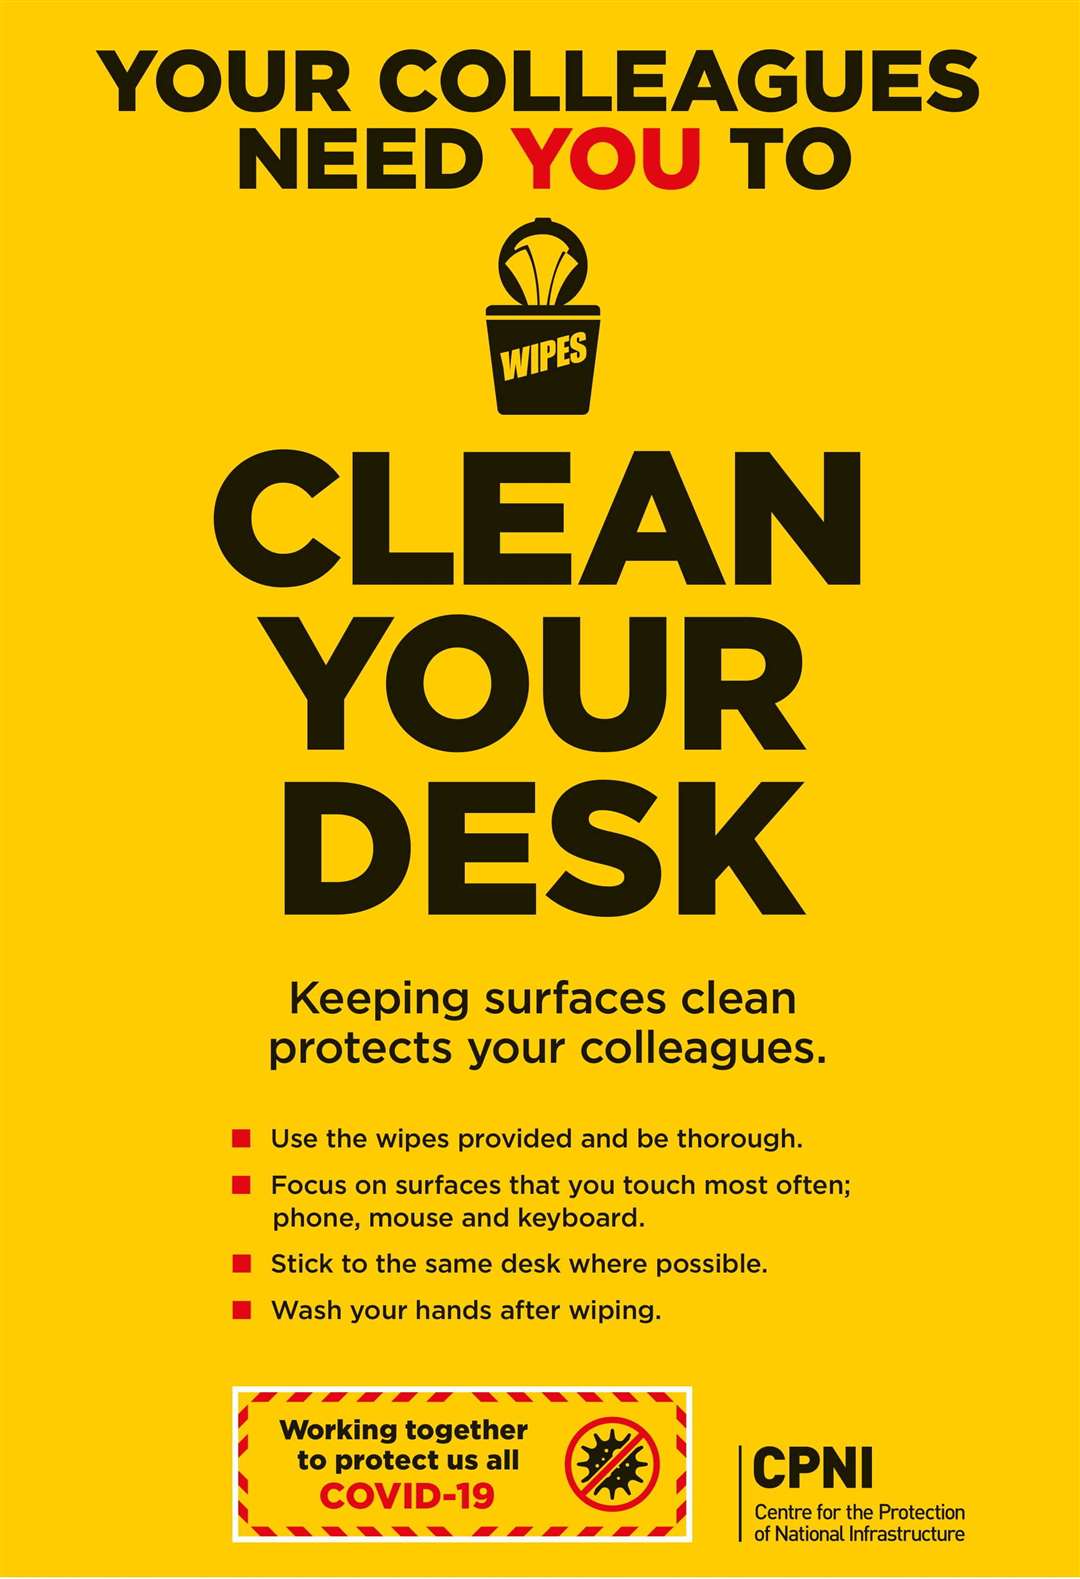 One of the advice posters calls on workers to clean their desks thoroughly